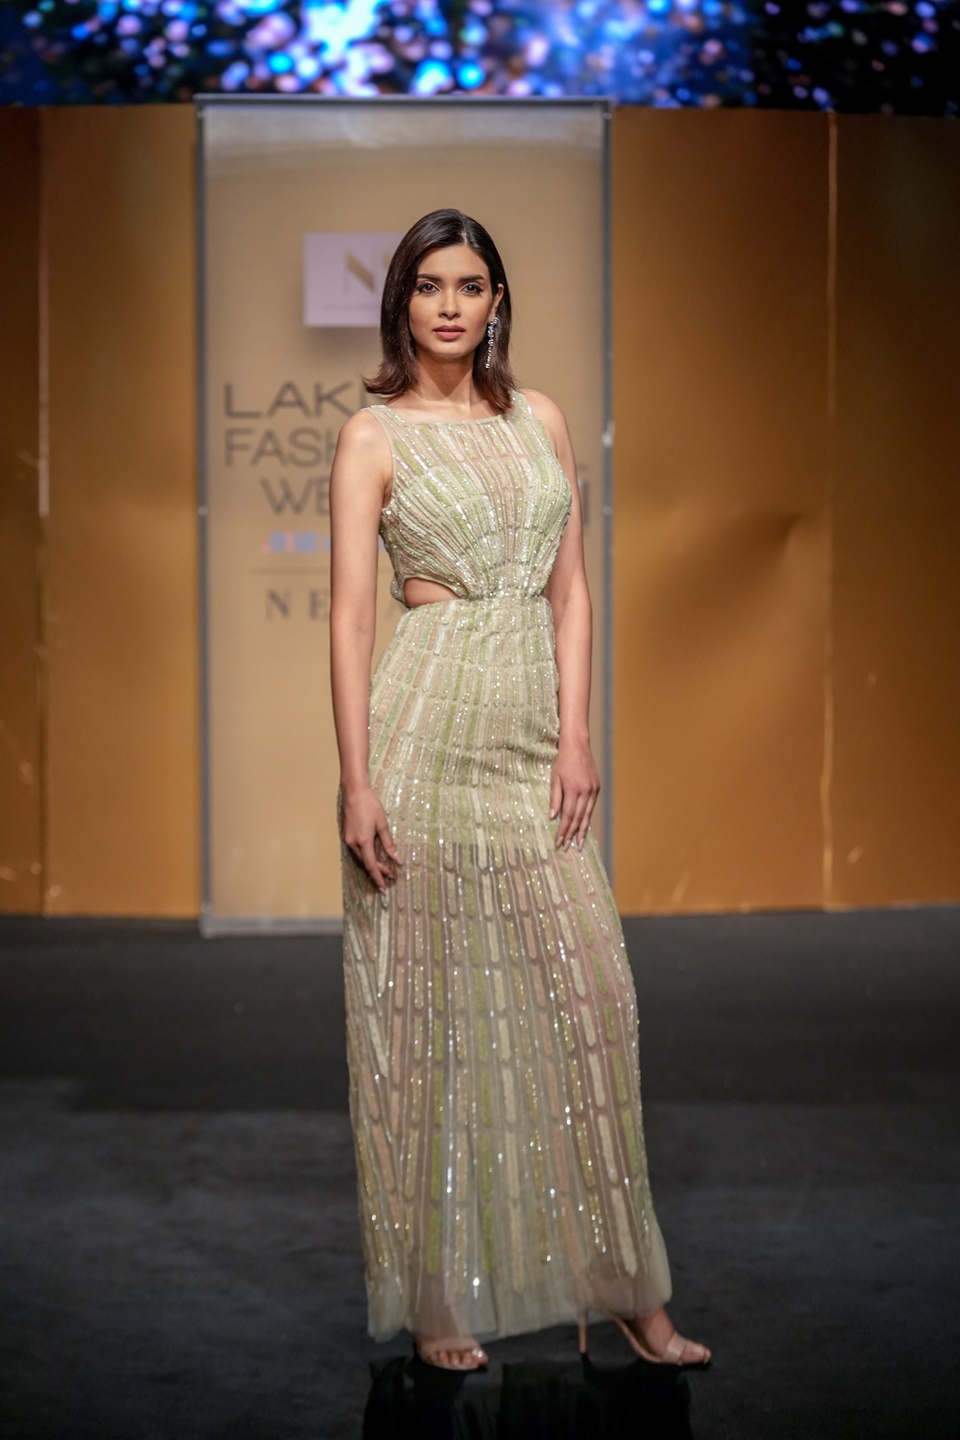 Diana Penty walked for Not So Serious